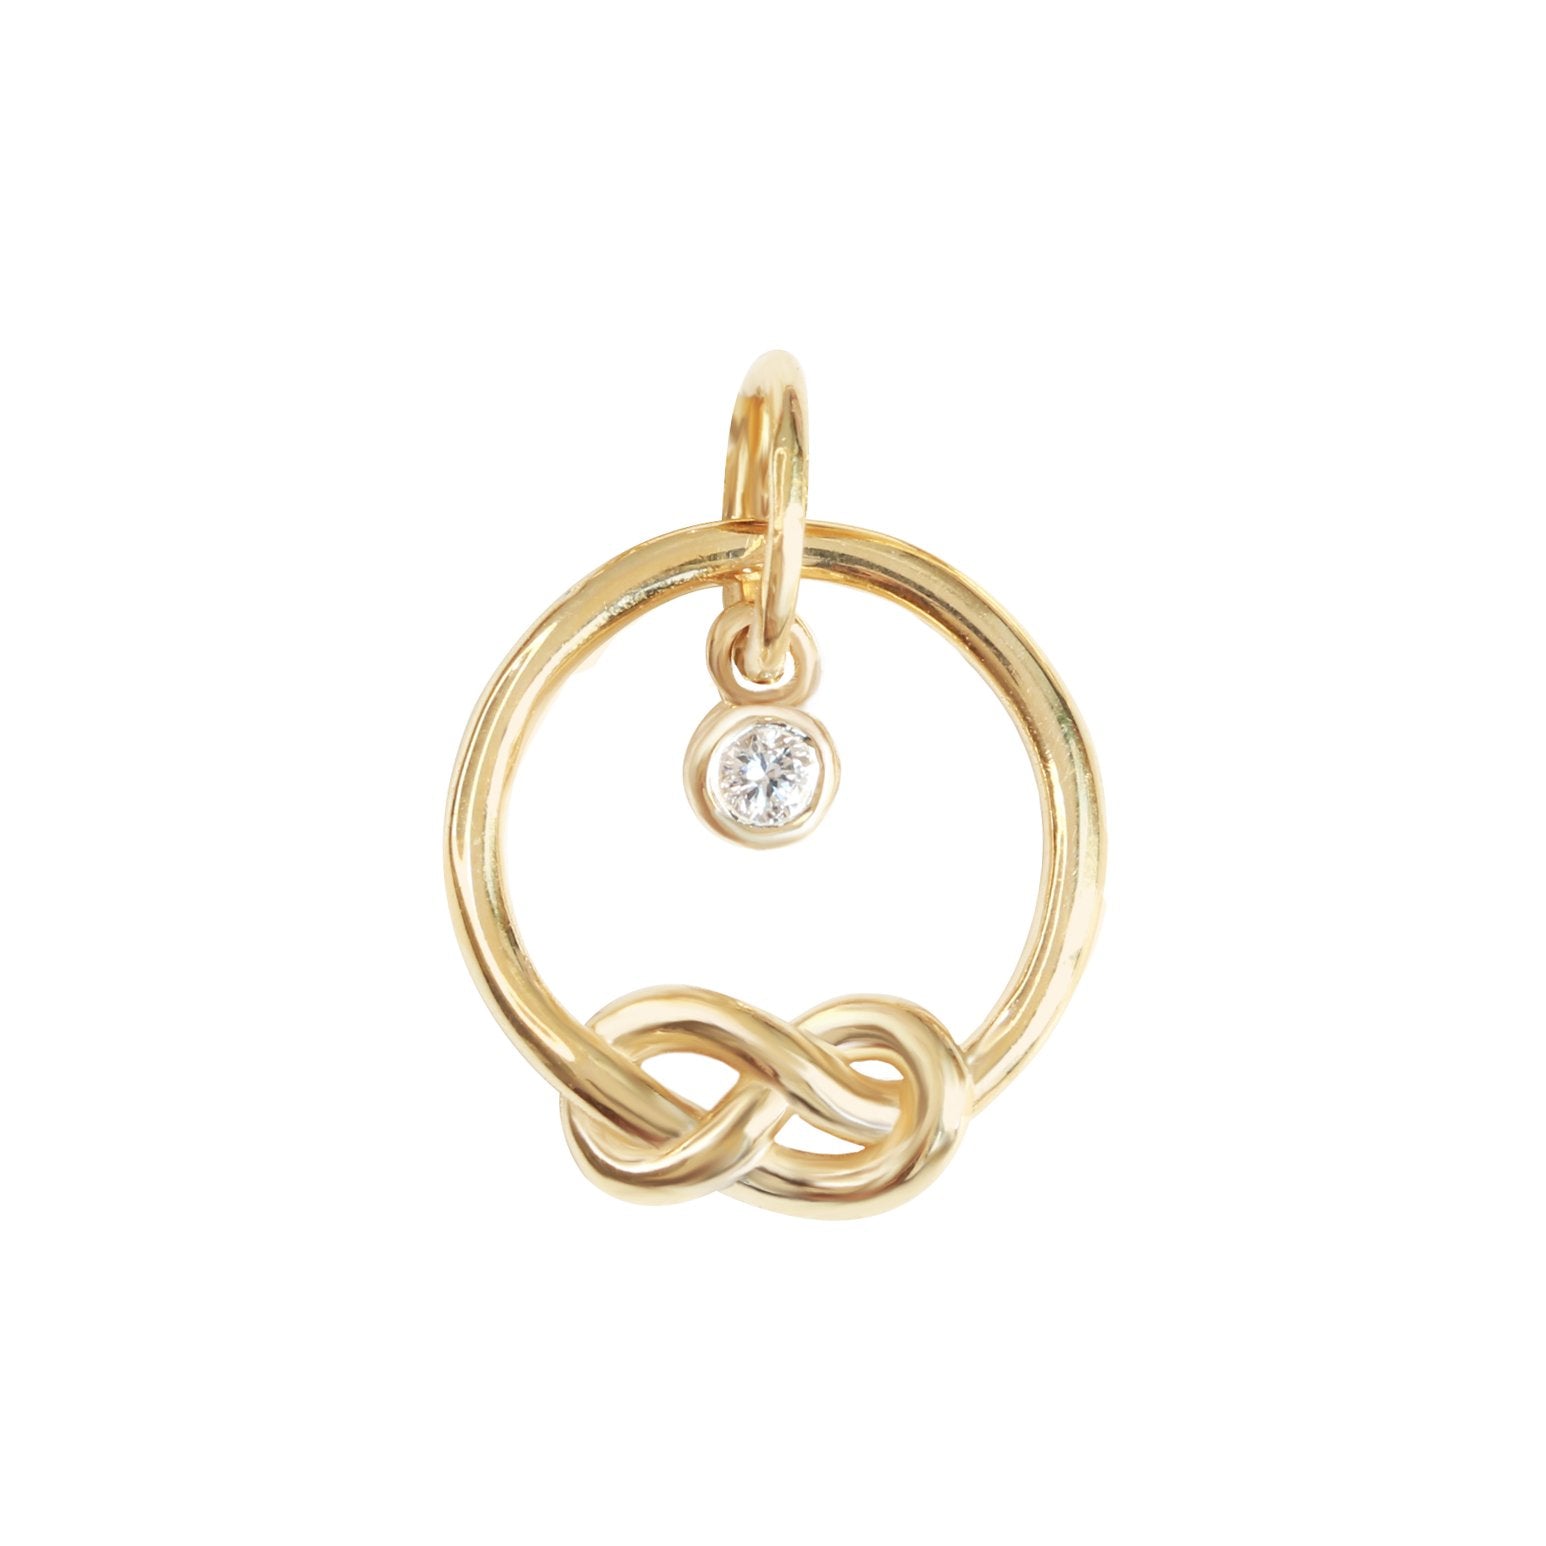 Infinity Knot Birthstone Pendant Necklace - 14K Yellow Gold, READY TO SHIP!